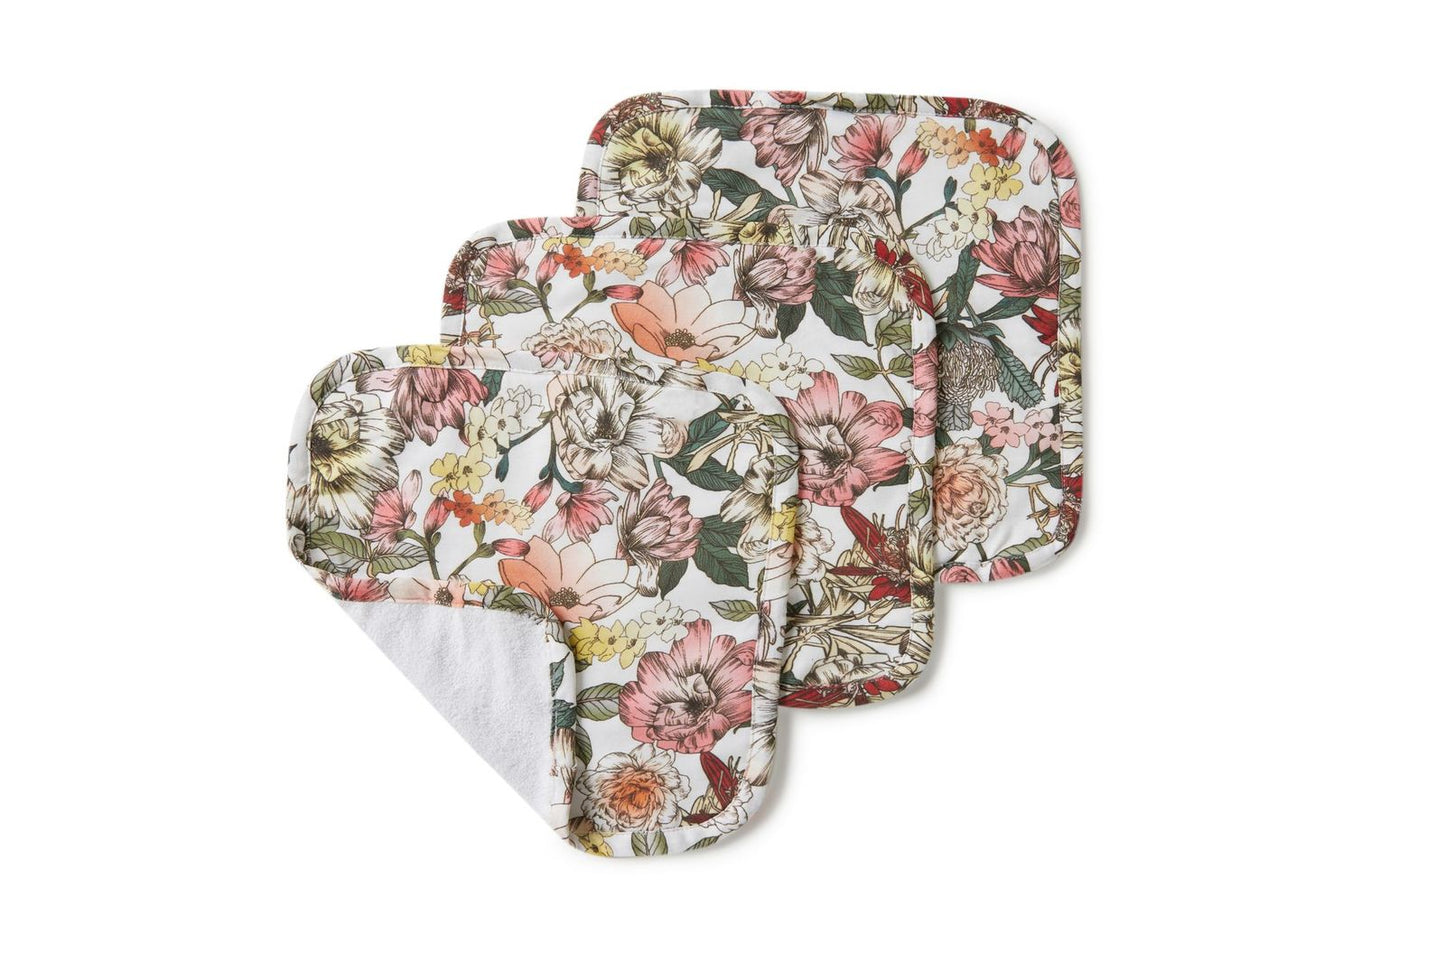 These beautiful organic face and body cloths in our Australiana print are perfect for baby, toddler and also for grownups. They make a great face and beauty cloth and means Mum, or Dad, can enjoy a little bit of Snuggle Hunny too! They will brighten up any bathroom with our bright prints.